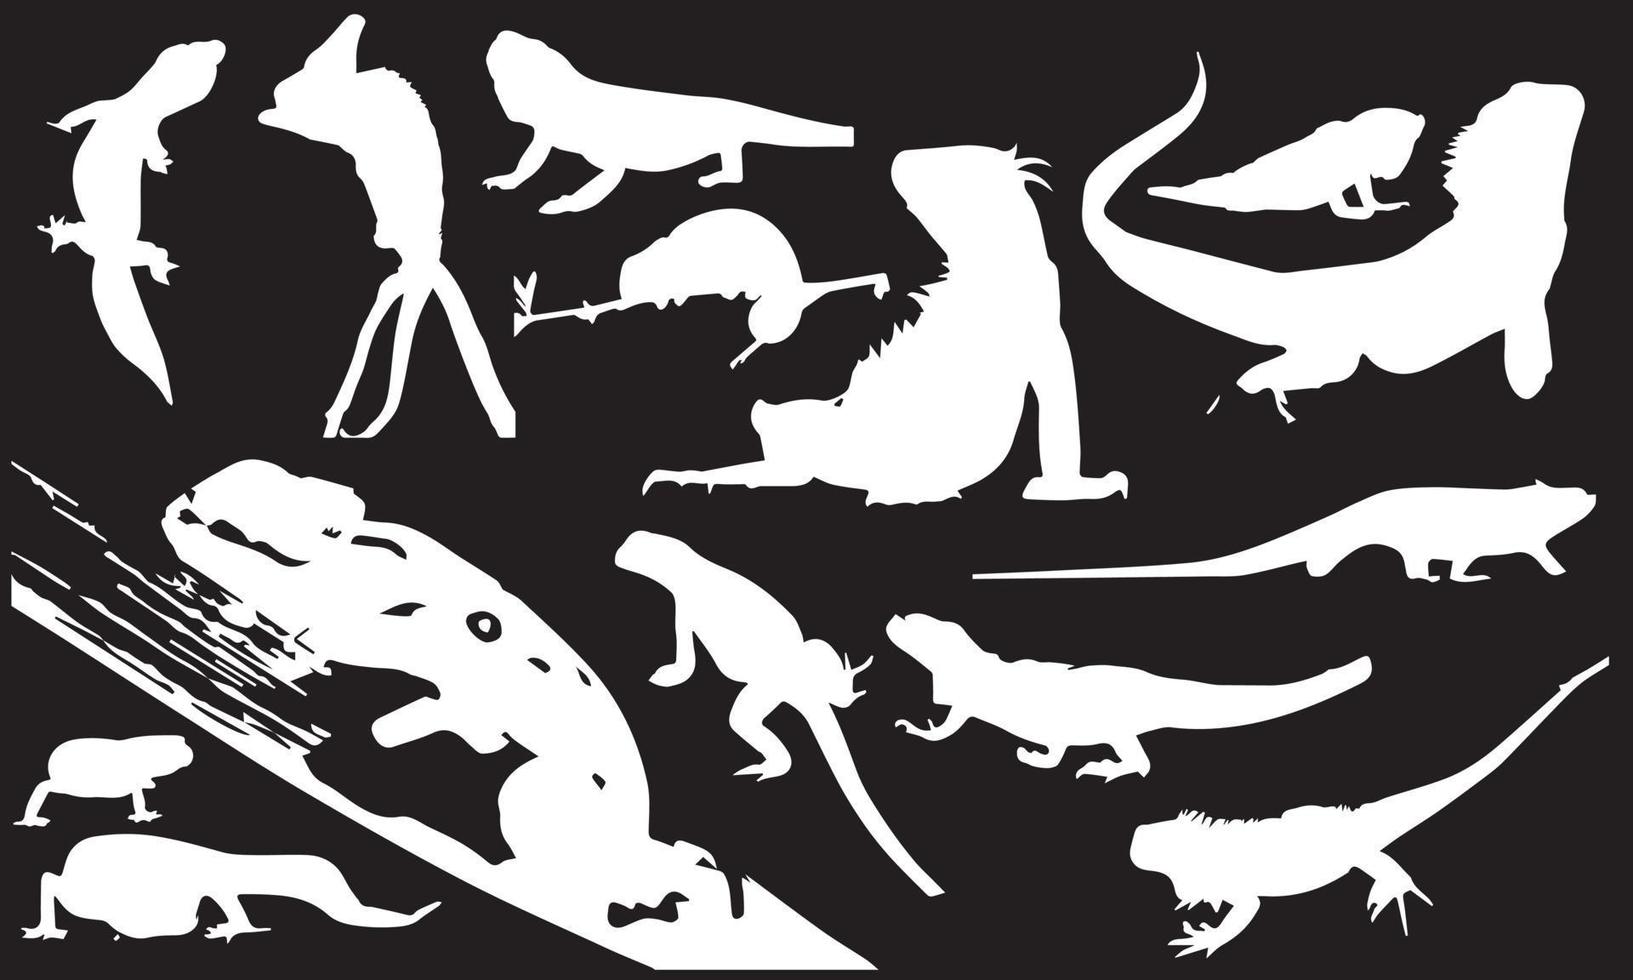 reptiles vector illustration design black and white background collection